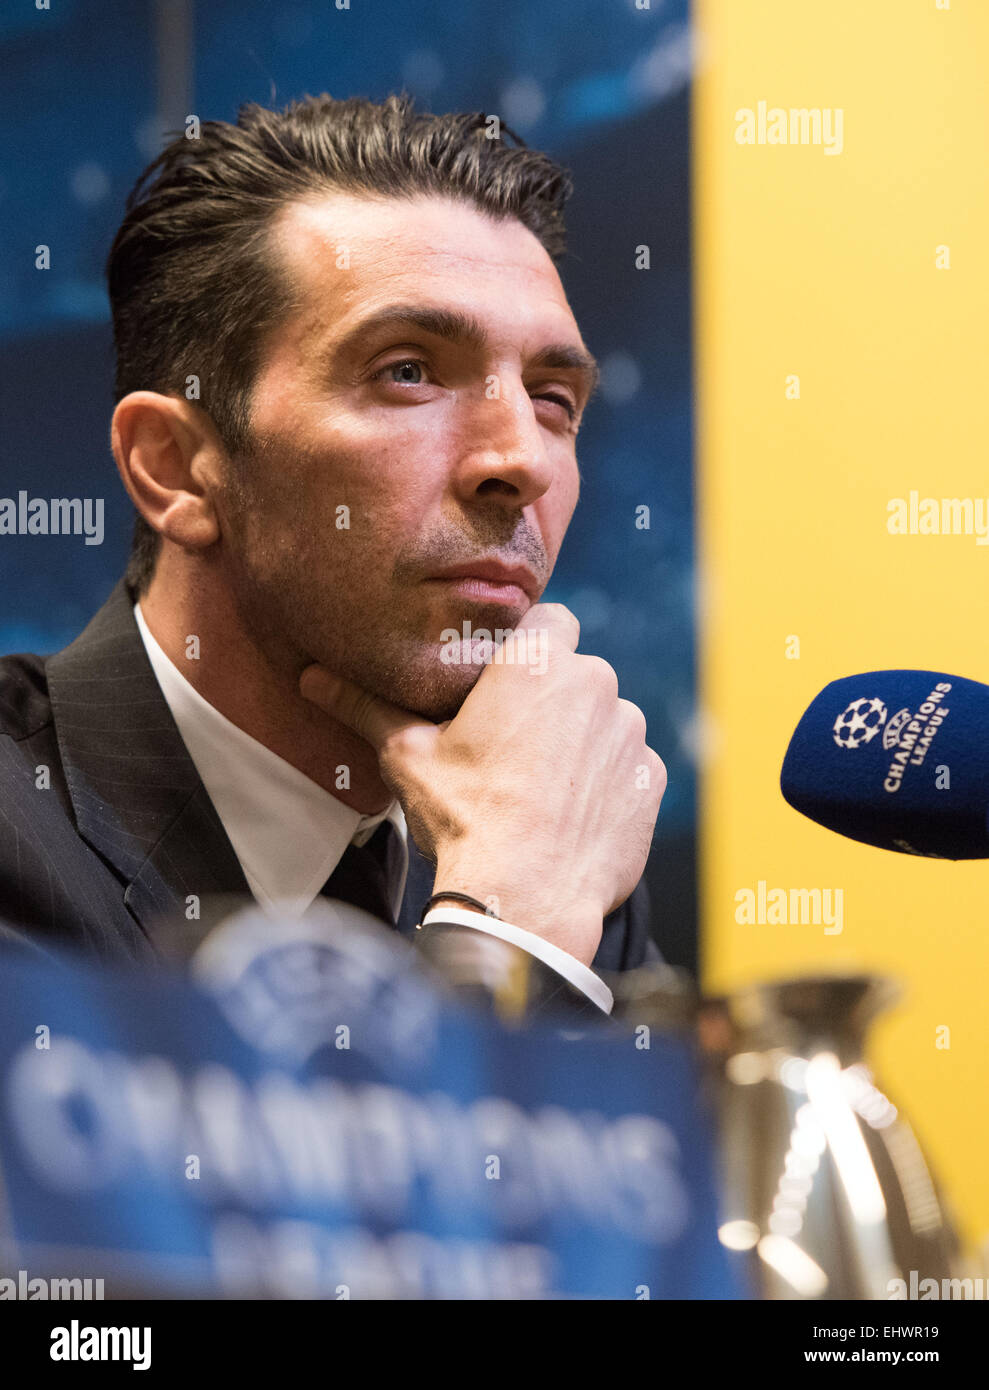 Juventus Turin's goalkeeper Gianluigi Buffon  speaks during a press conference  of Borussia Dortmund in Drtomuind, Germany, 17 March 2015. Borussia Dortmund will play against Juventus Turin in the Champions League Round of Sixteen soccer match on 18 March 2015. Photo:  Bernd Thissen/dpa Stock Photo